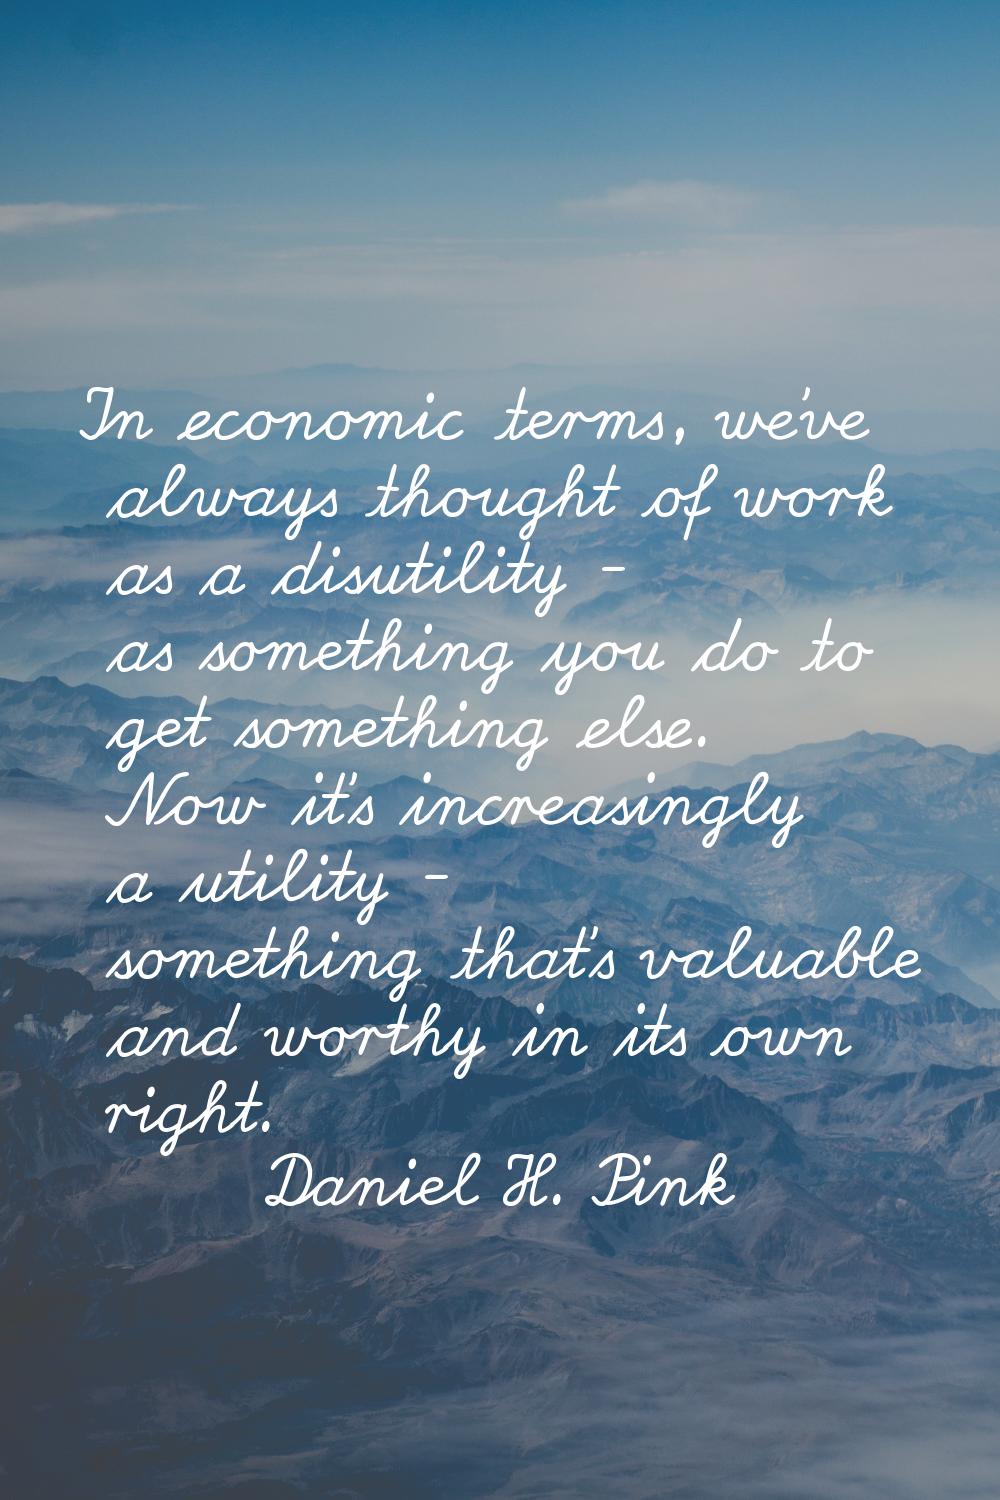 In economic terms, we've always thought of work as a disutility - as something you do to get someth